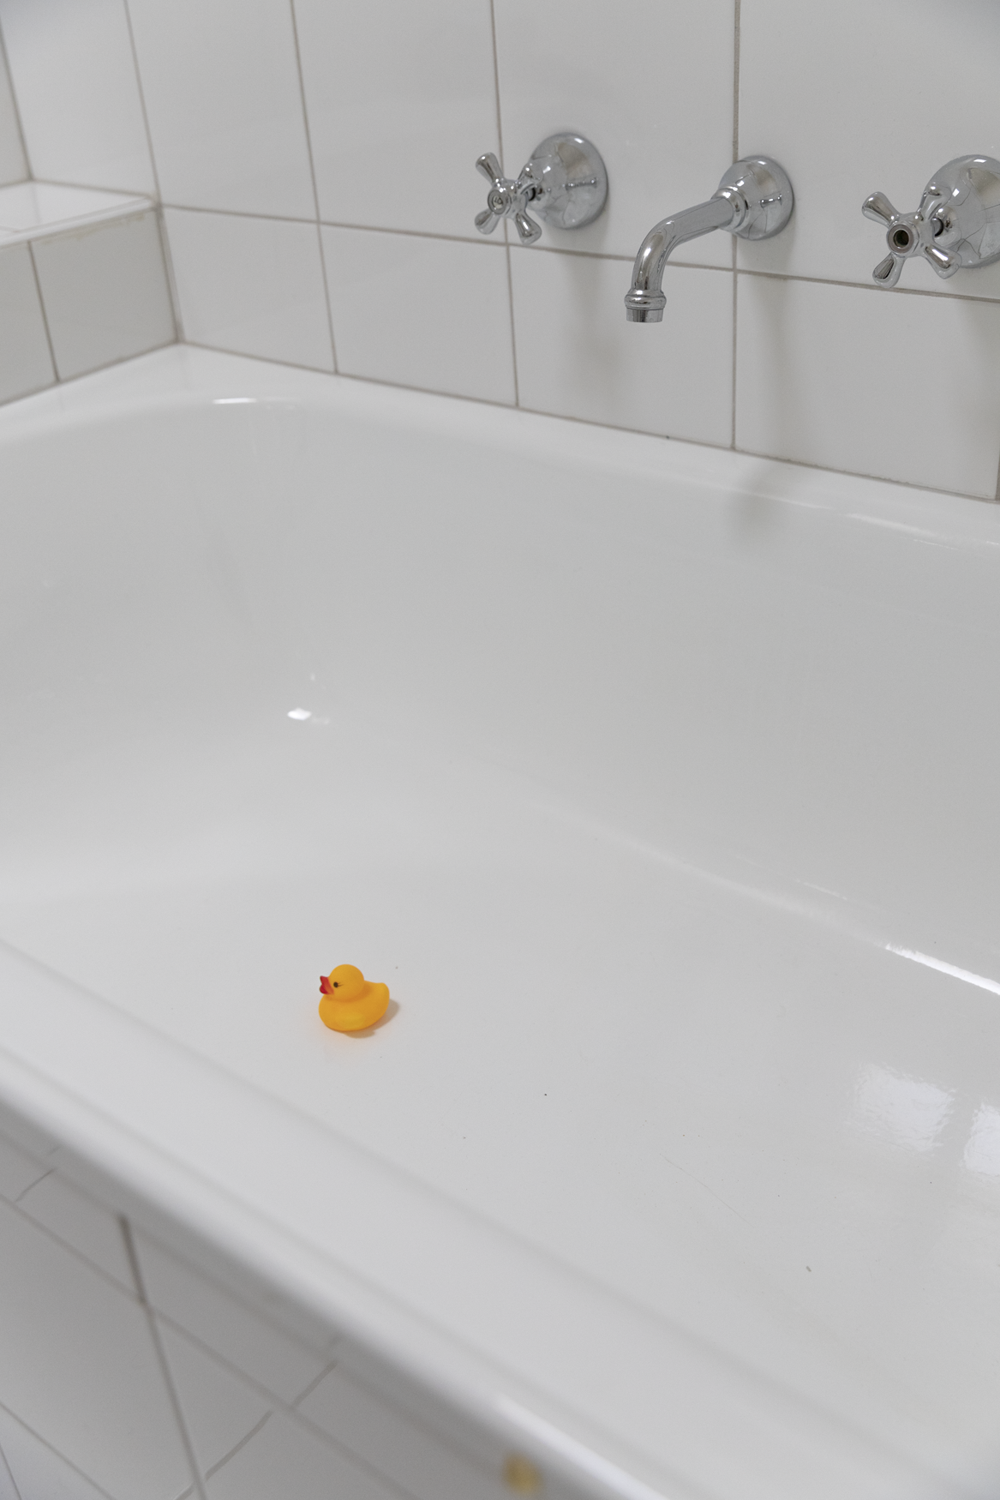 Colour photograph of rubber duck alone in large white bathtub.